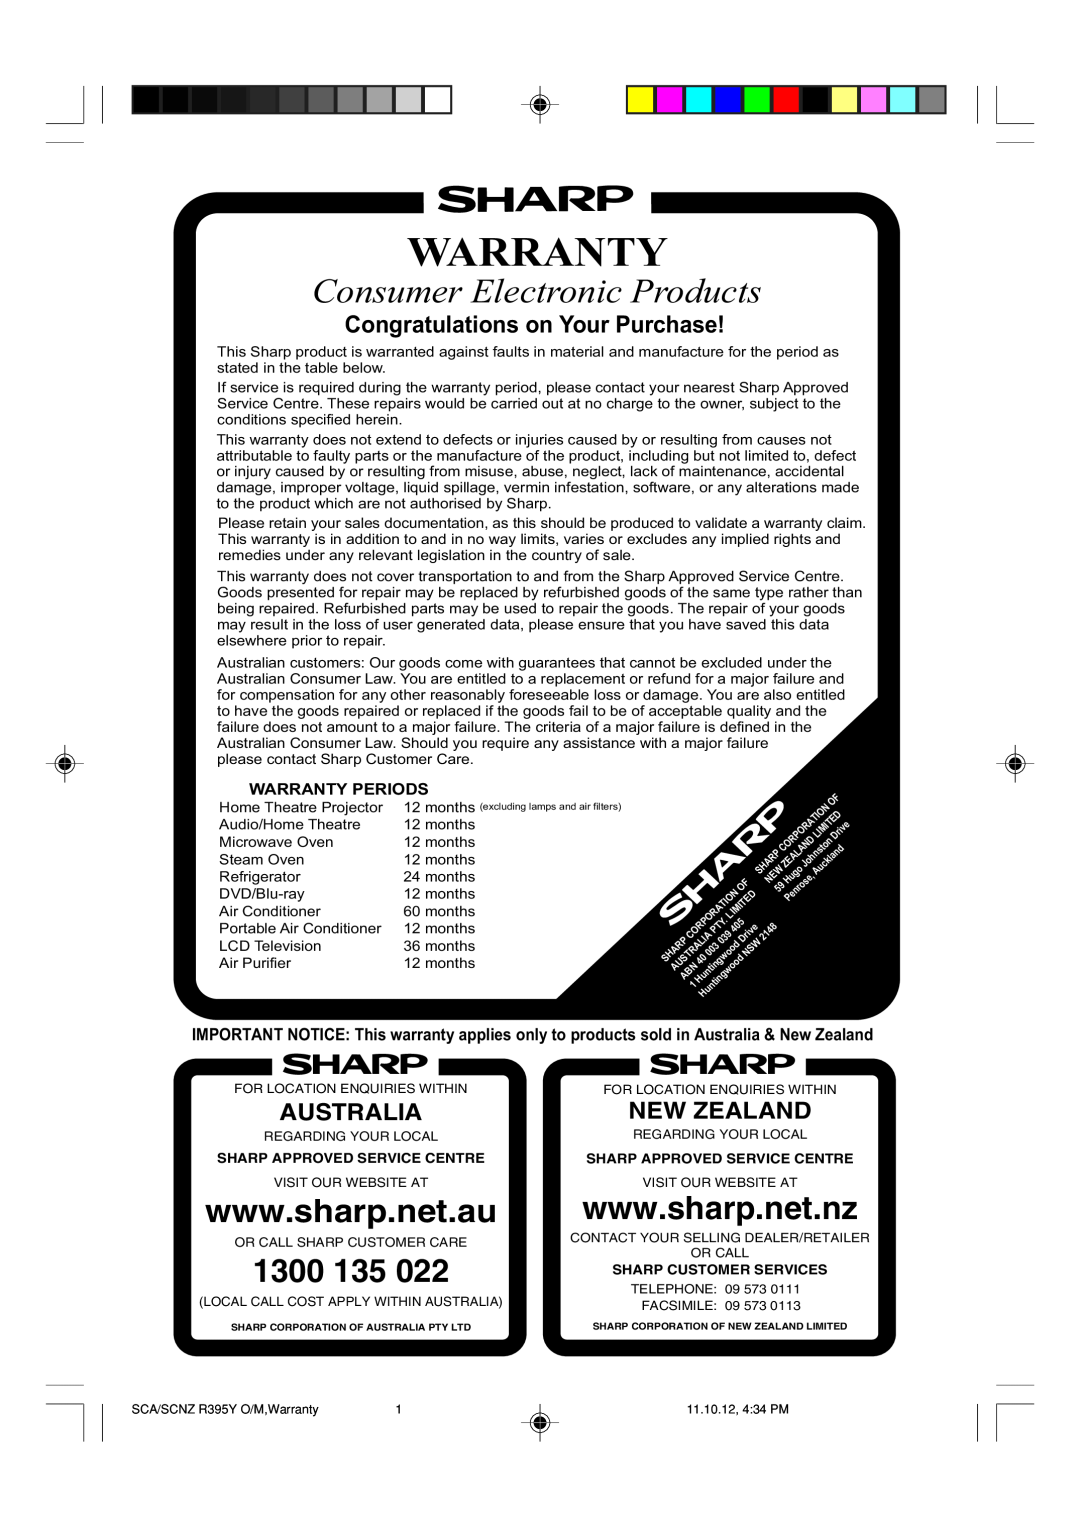 Sharp R-380Z(W) operation manual Consumer Electronic Products, Congratulations on Your Purchase, Warranty Periods 